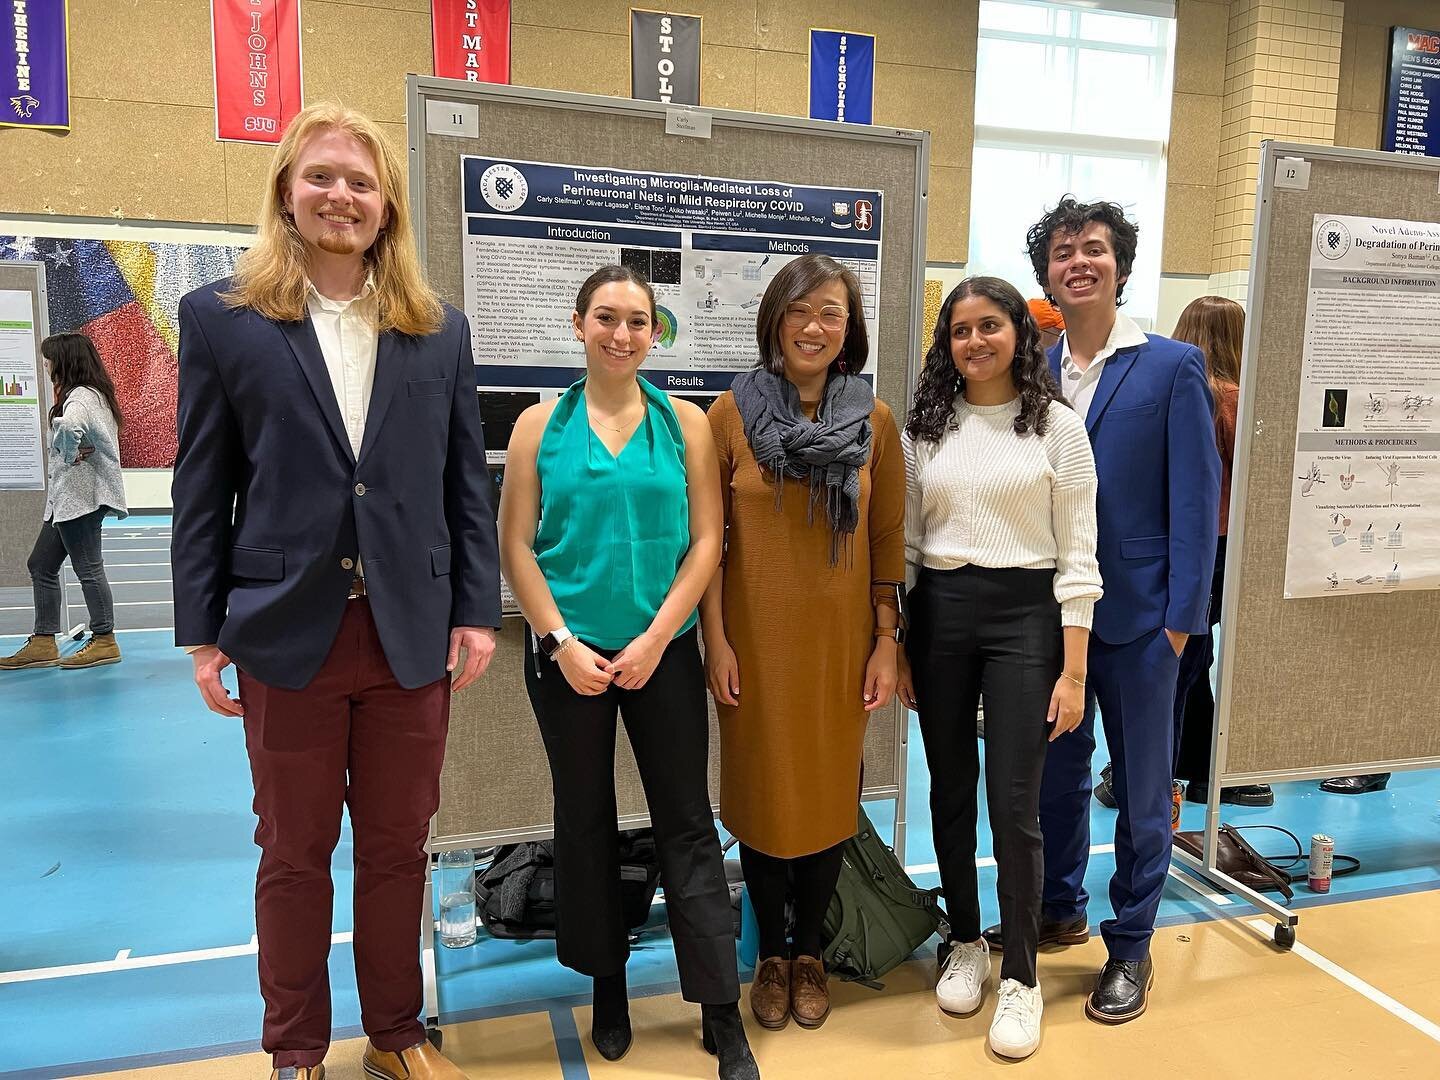 🙌Congrats to these students for presenting their work at MacFest 🙌